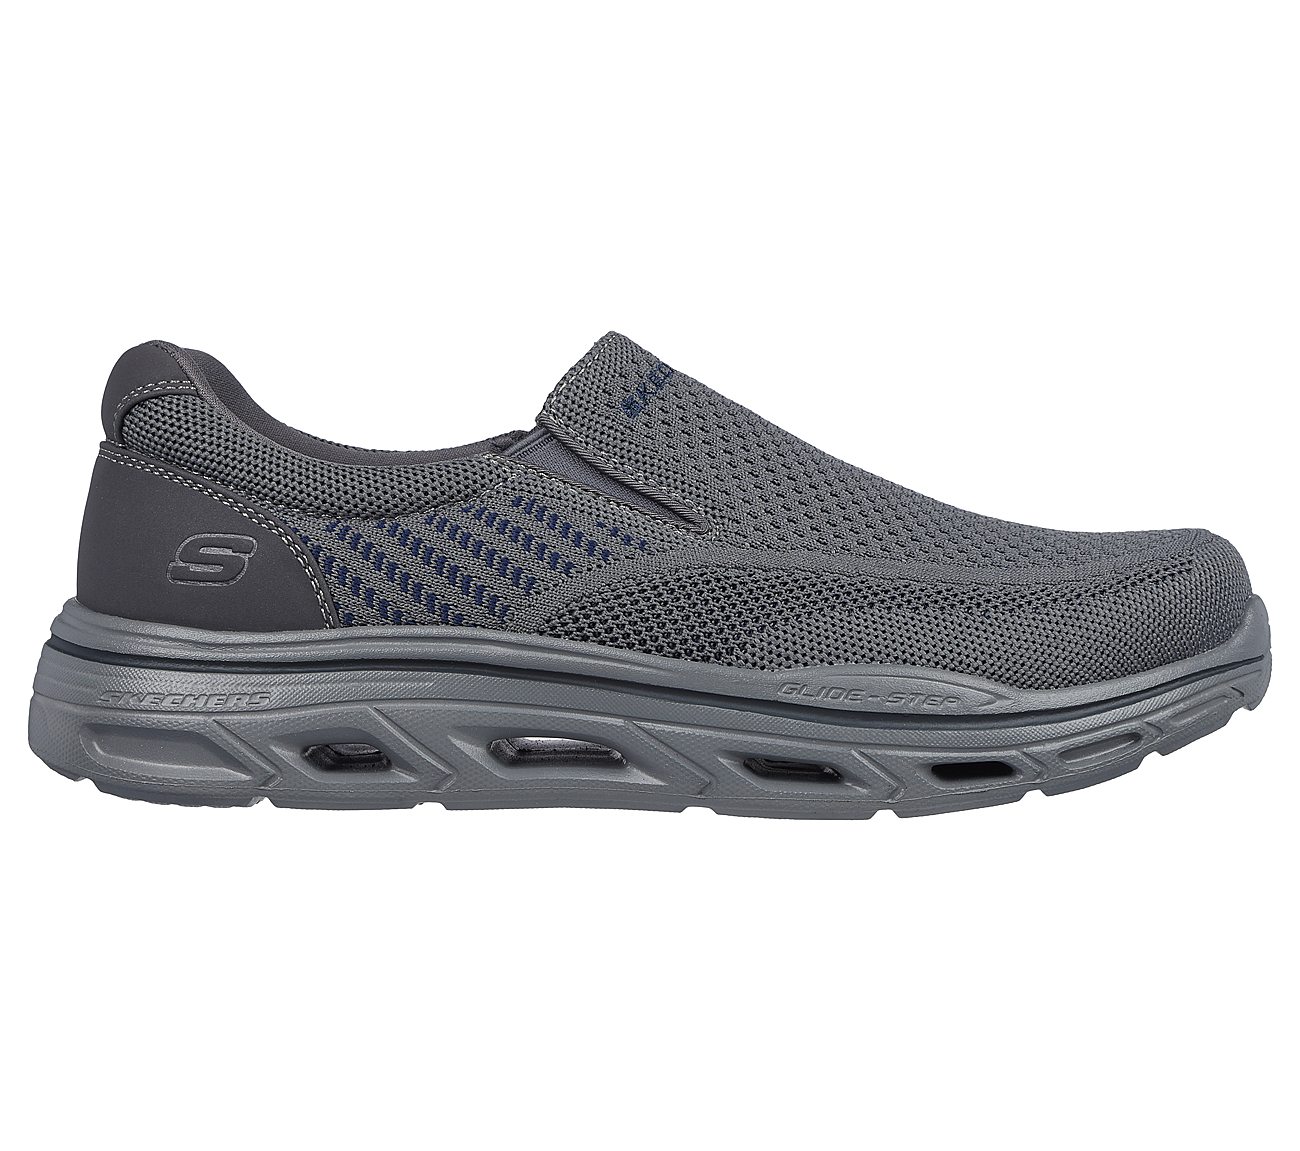 GLIDE-STEP EXPECTED - VIRDEN, GREY/NAVY Footwear Lateral View